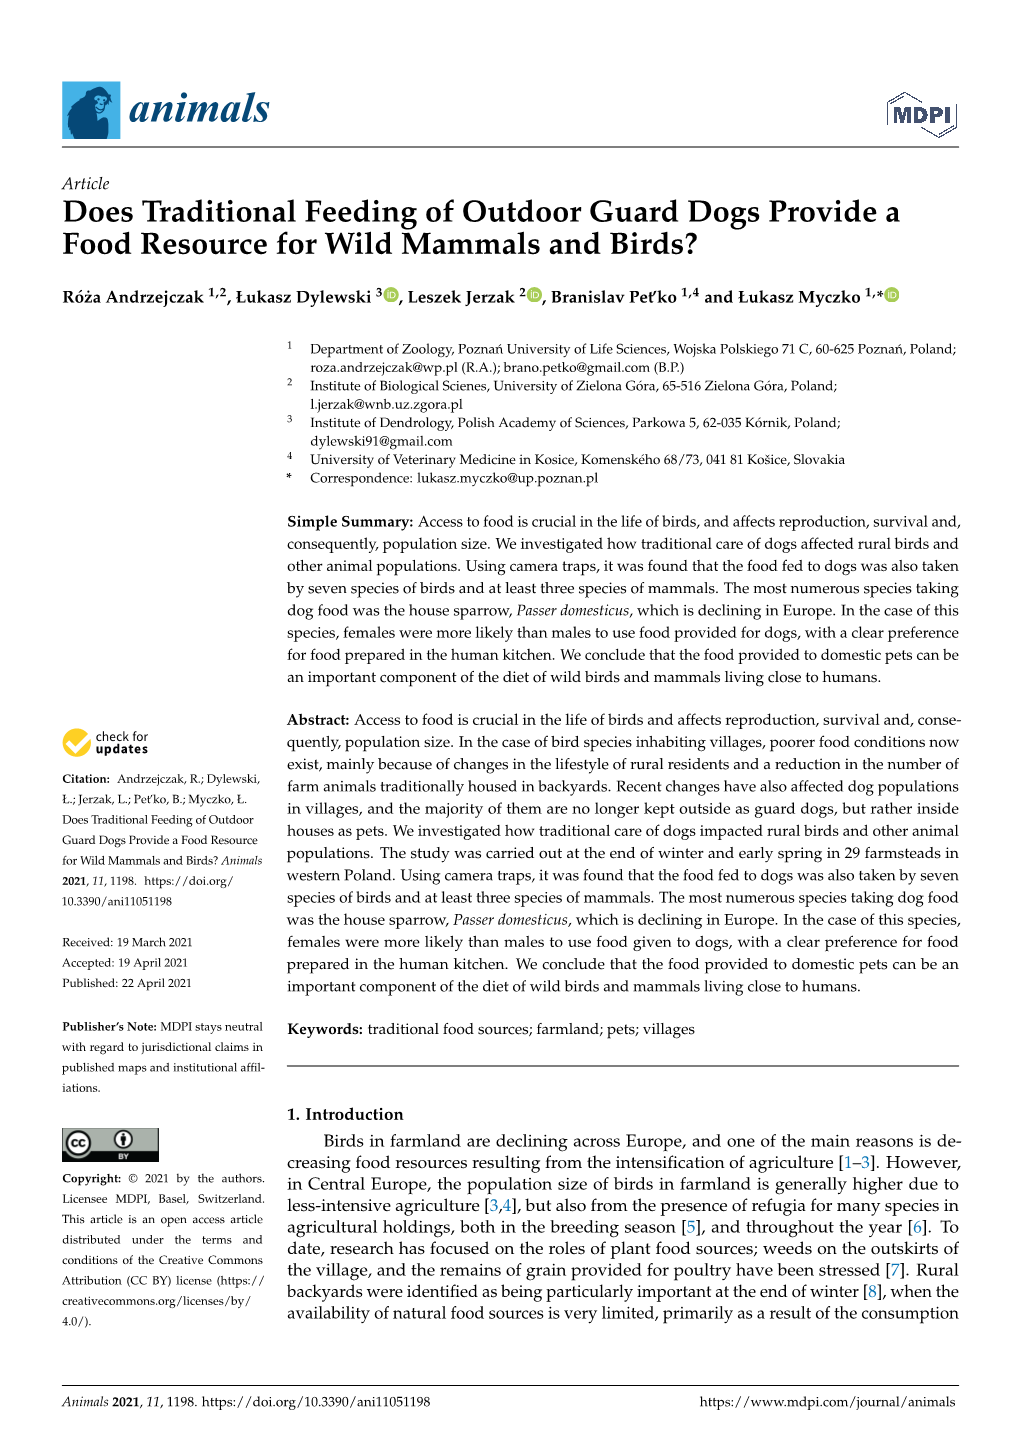 Does Traditional Feeding of Outdoor Guard Dogs Provide a Food Resource for Wild Mammals and Birds?